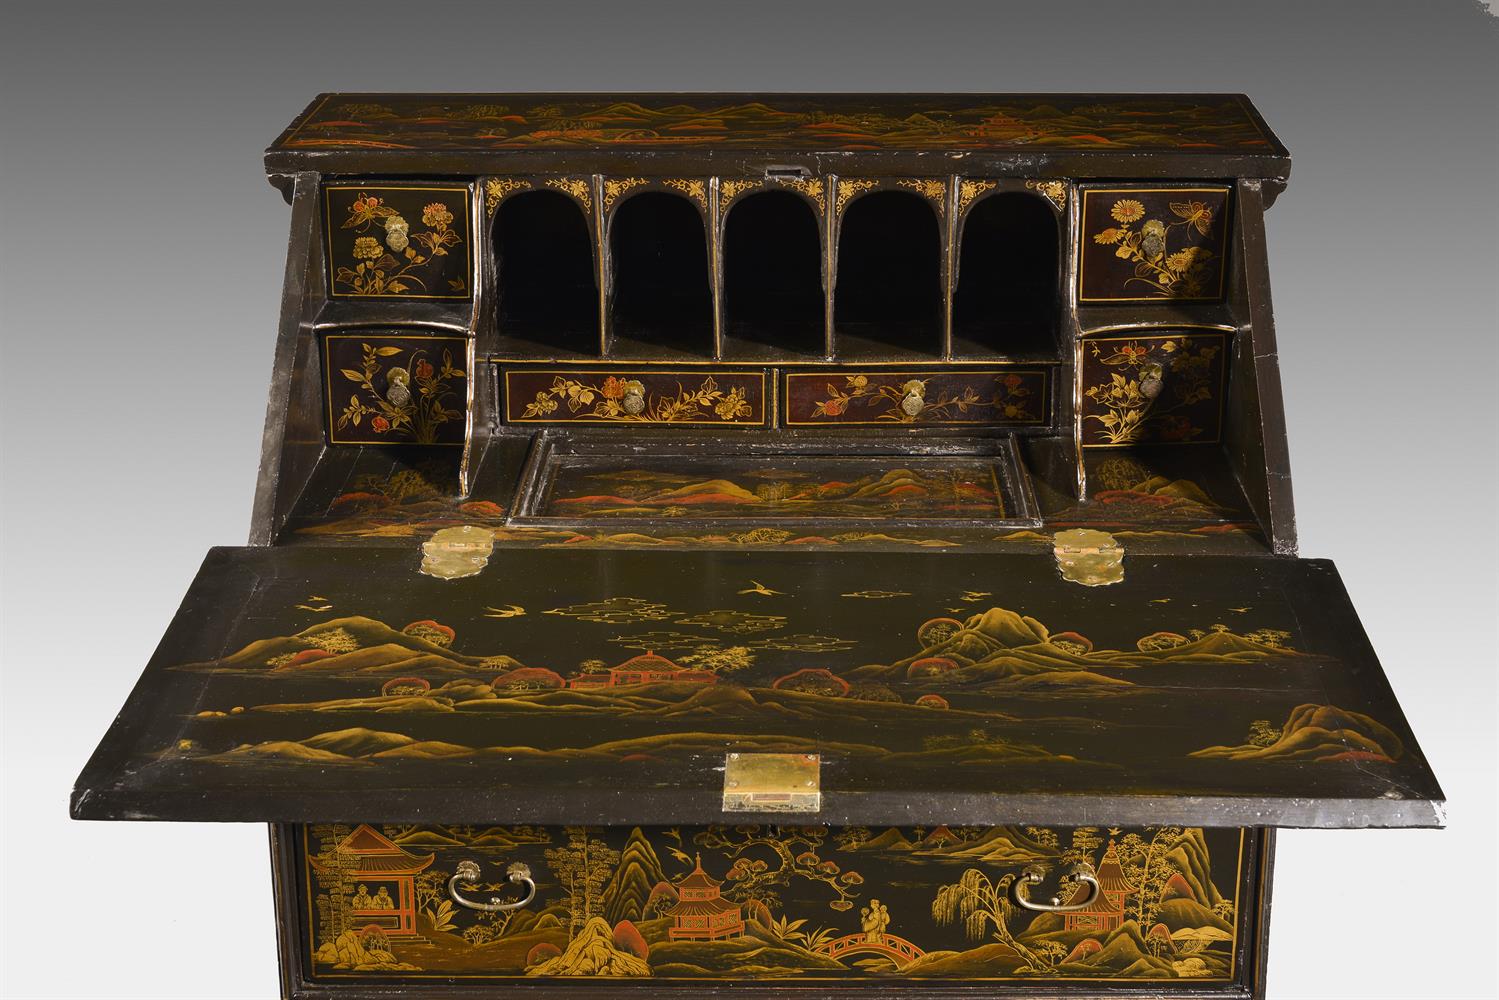 A BLACK LACQUER AND GILT CHINOISERIE DECORATED BUREAU, IN QUEEN ANNE STYLE - Image 4 of 10